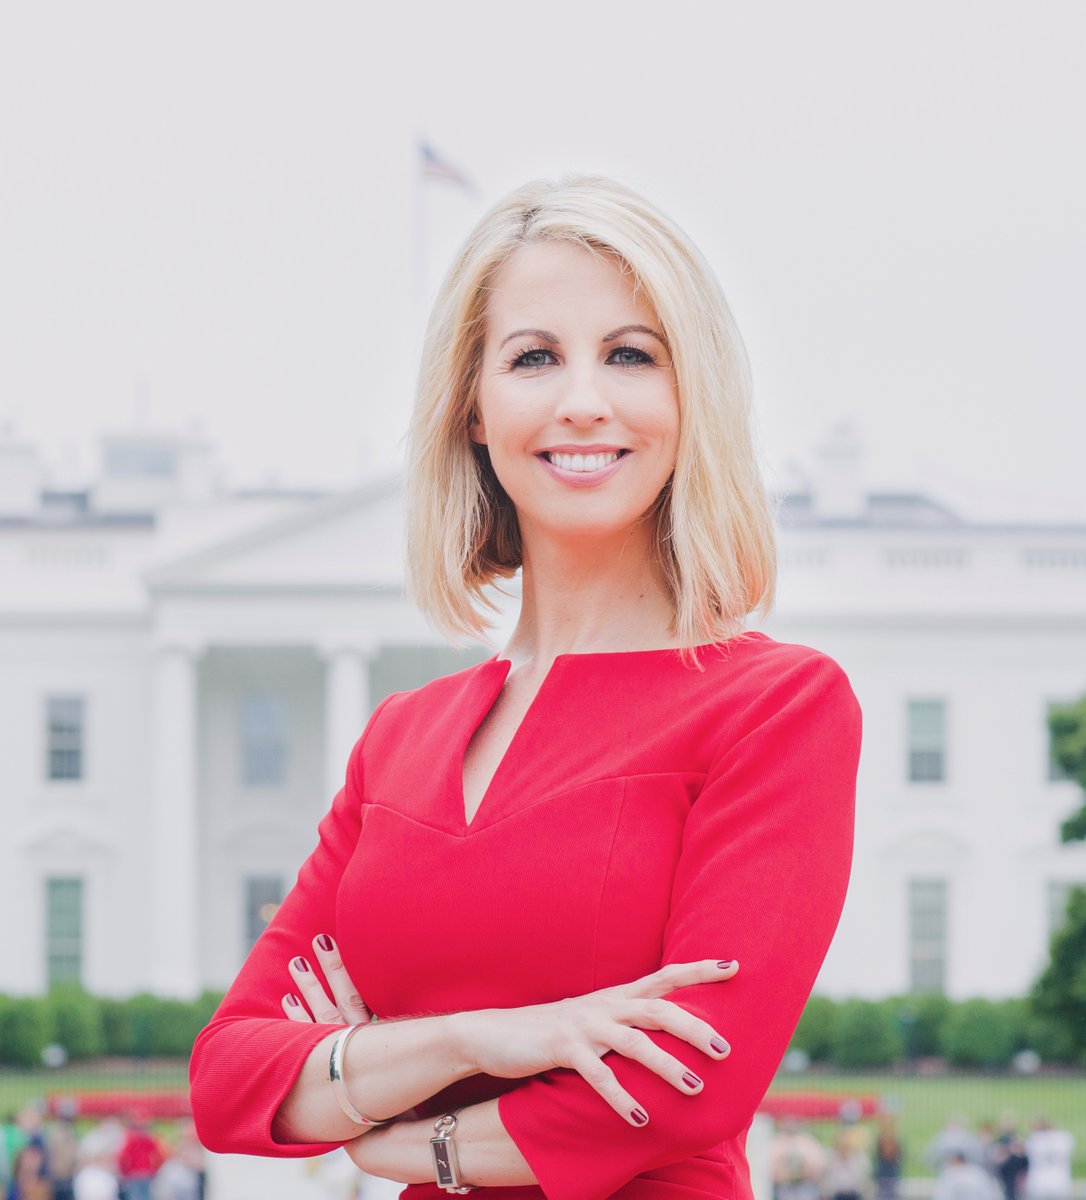 We’re pleased to announce that Caitríona Perry (@CaitrionaPerry) will be joining the BBC News channel as a Chief Presenter, based in Washington D.C. Welcome to the team Caitríona! Read more: bbc.com/mediacentre/20…